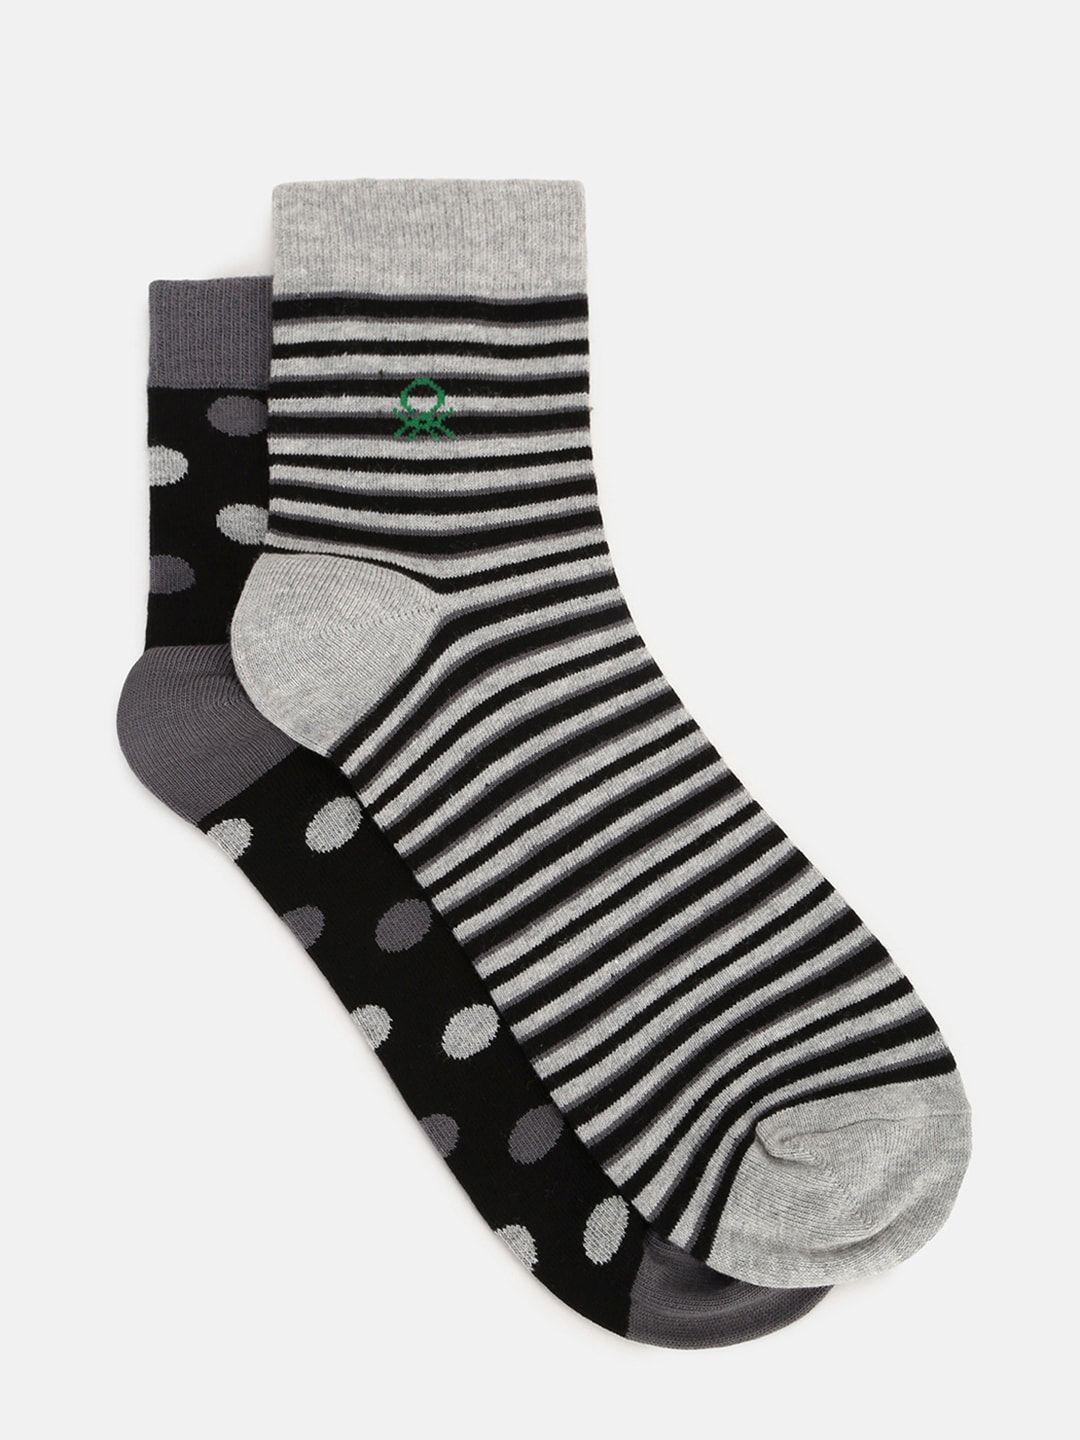 united colors of benetton men pack of 2 pairs of patterned above ankle-length socks